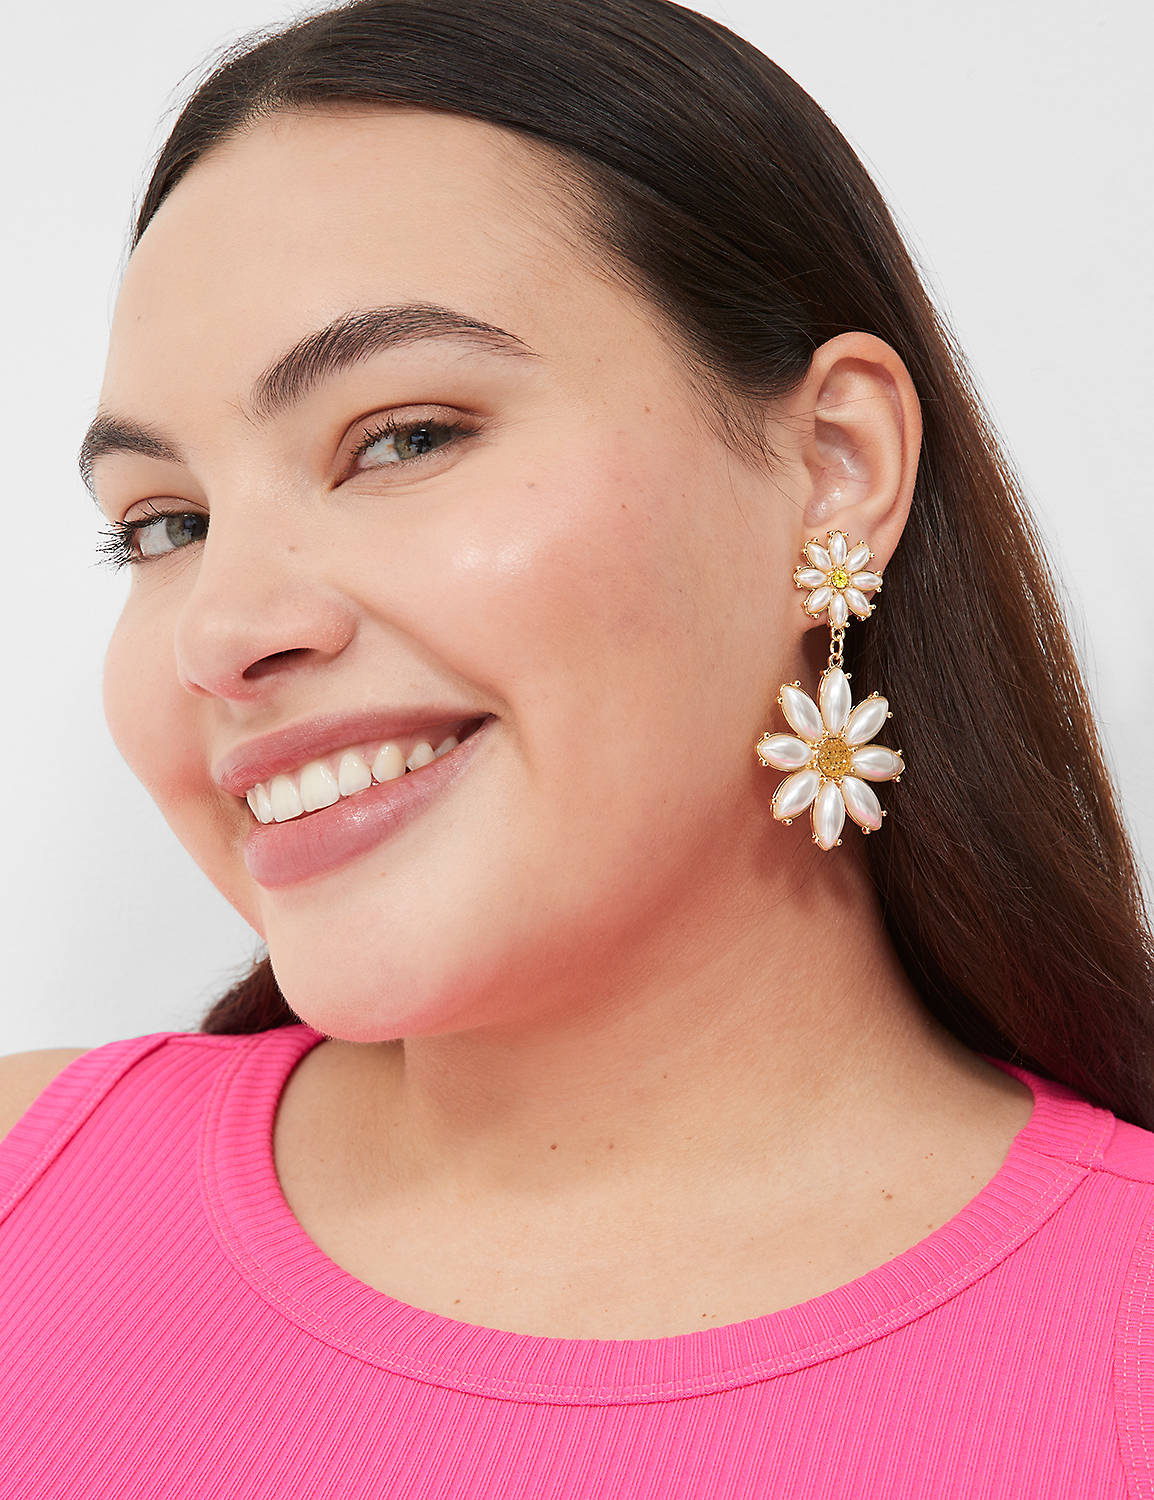 Floral Pearl Statement Earrings Product Image 1